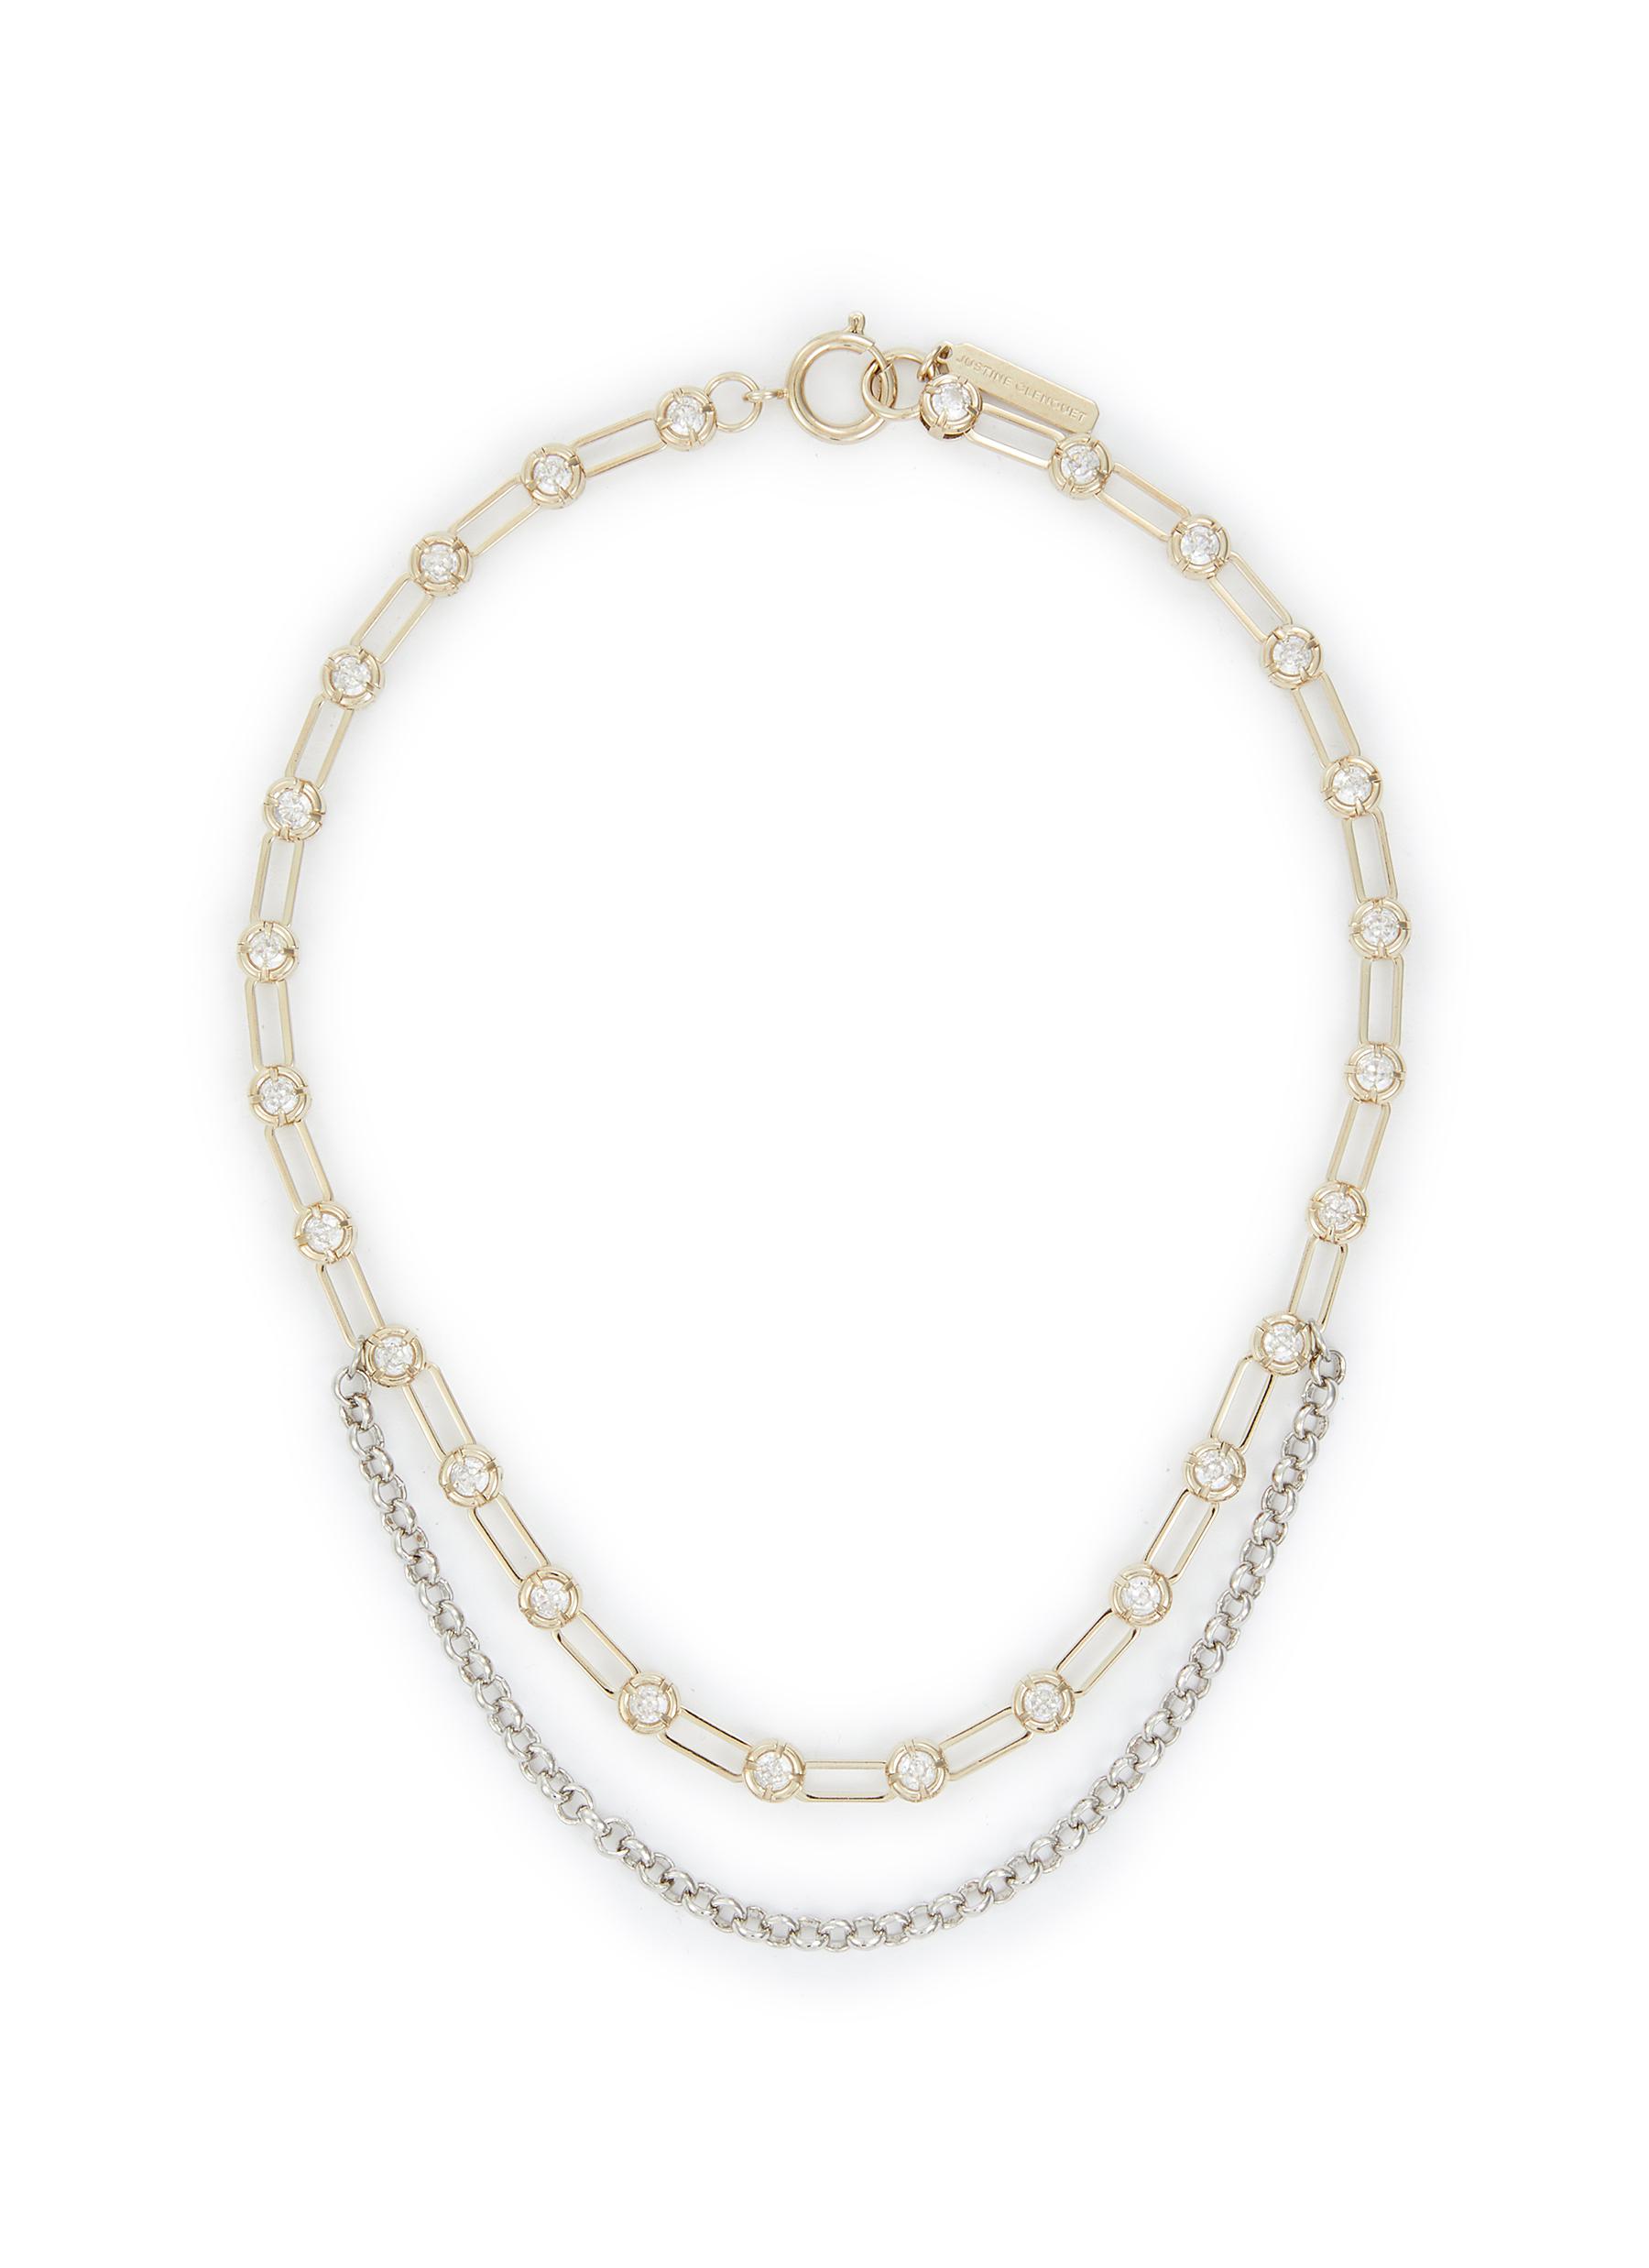 Justine Clenquet: Silver Charly Necklace | SSENSE